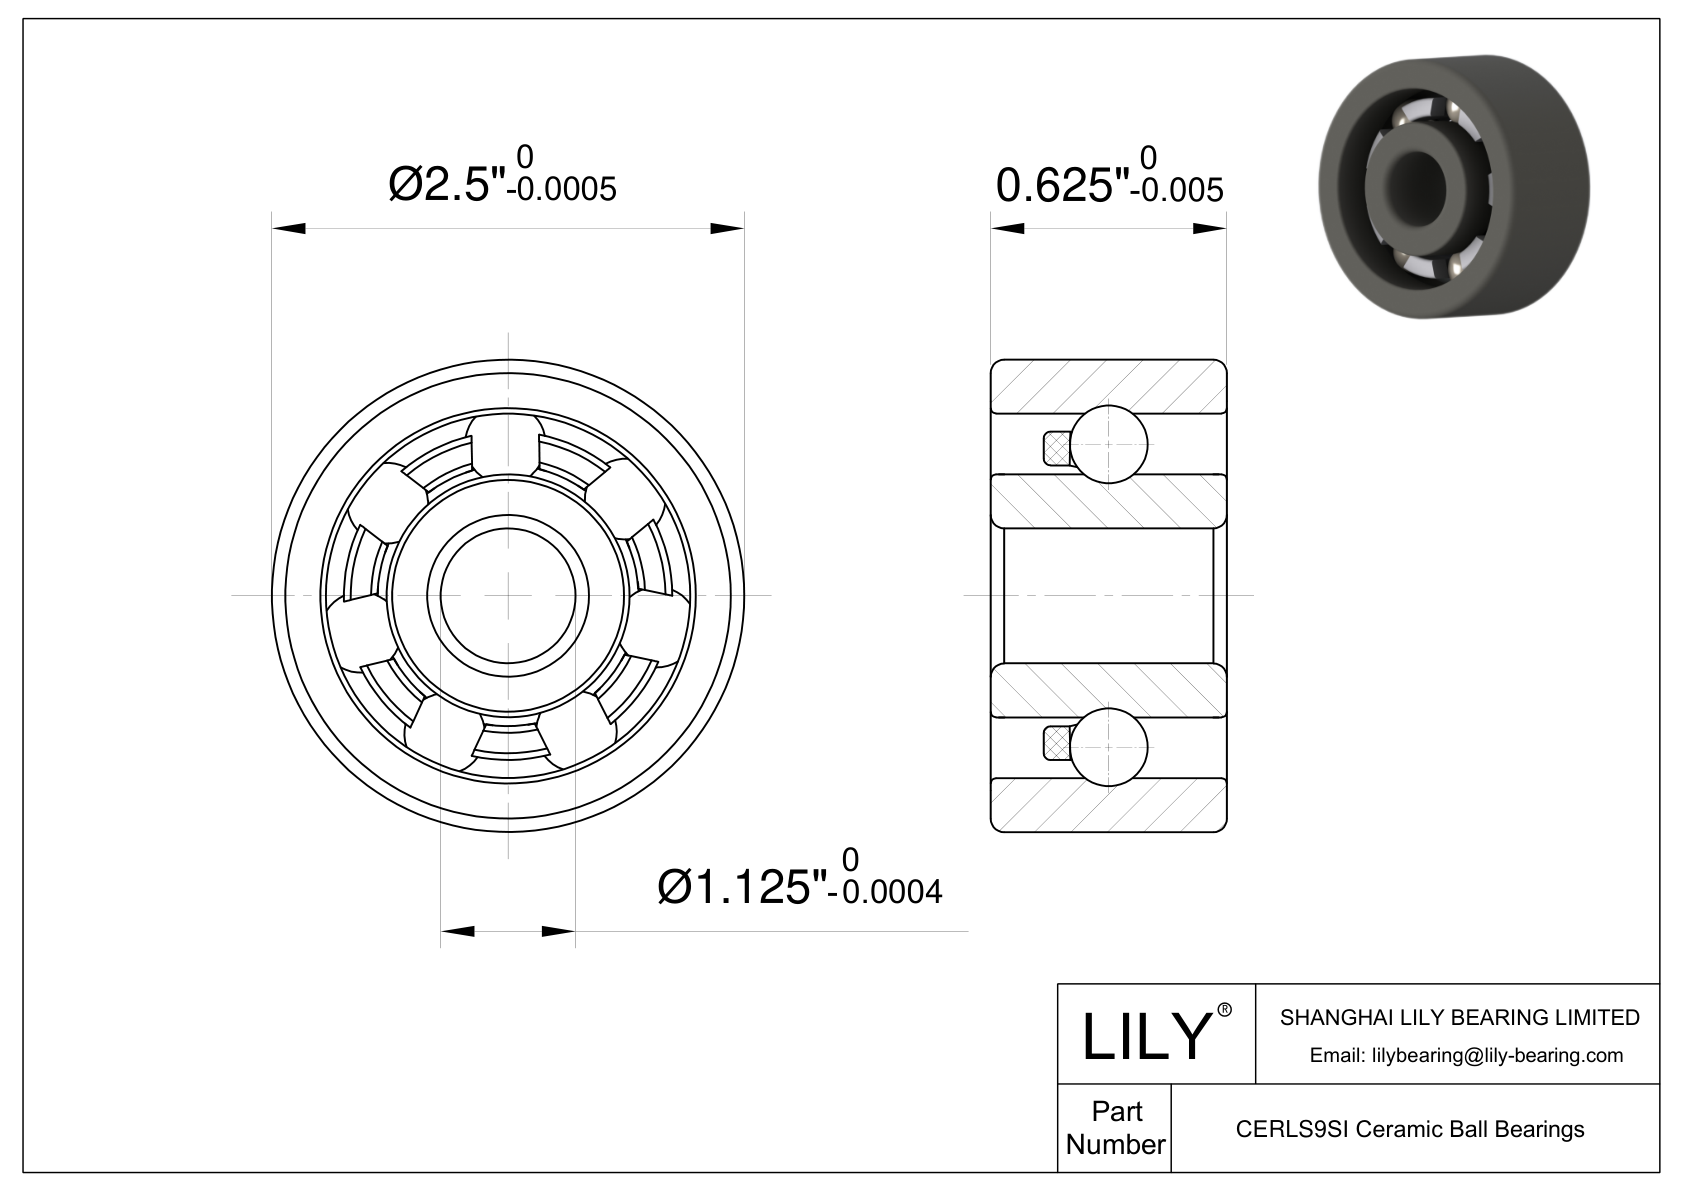 CESI RLS9 Inch Size Silicon Nitride Ceramic Bearings cad drawing